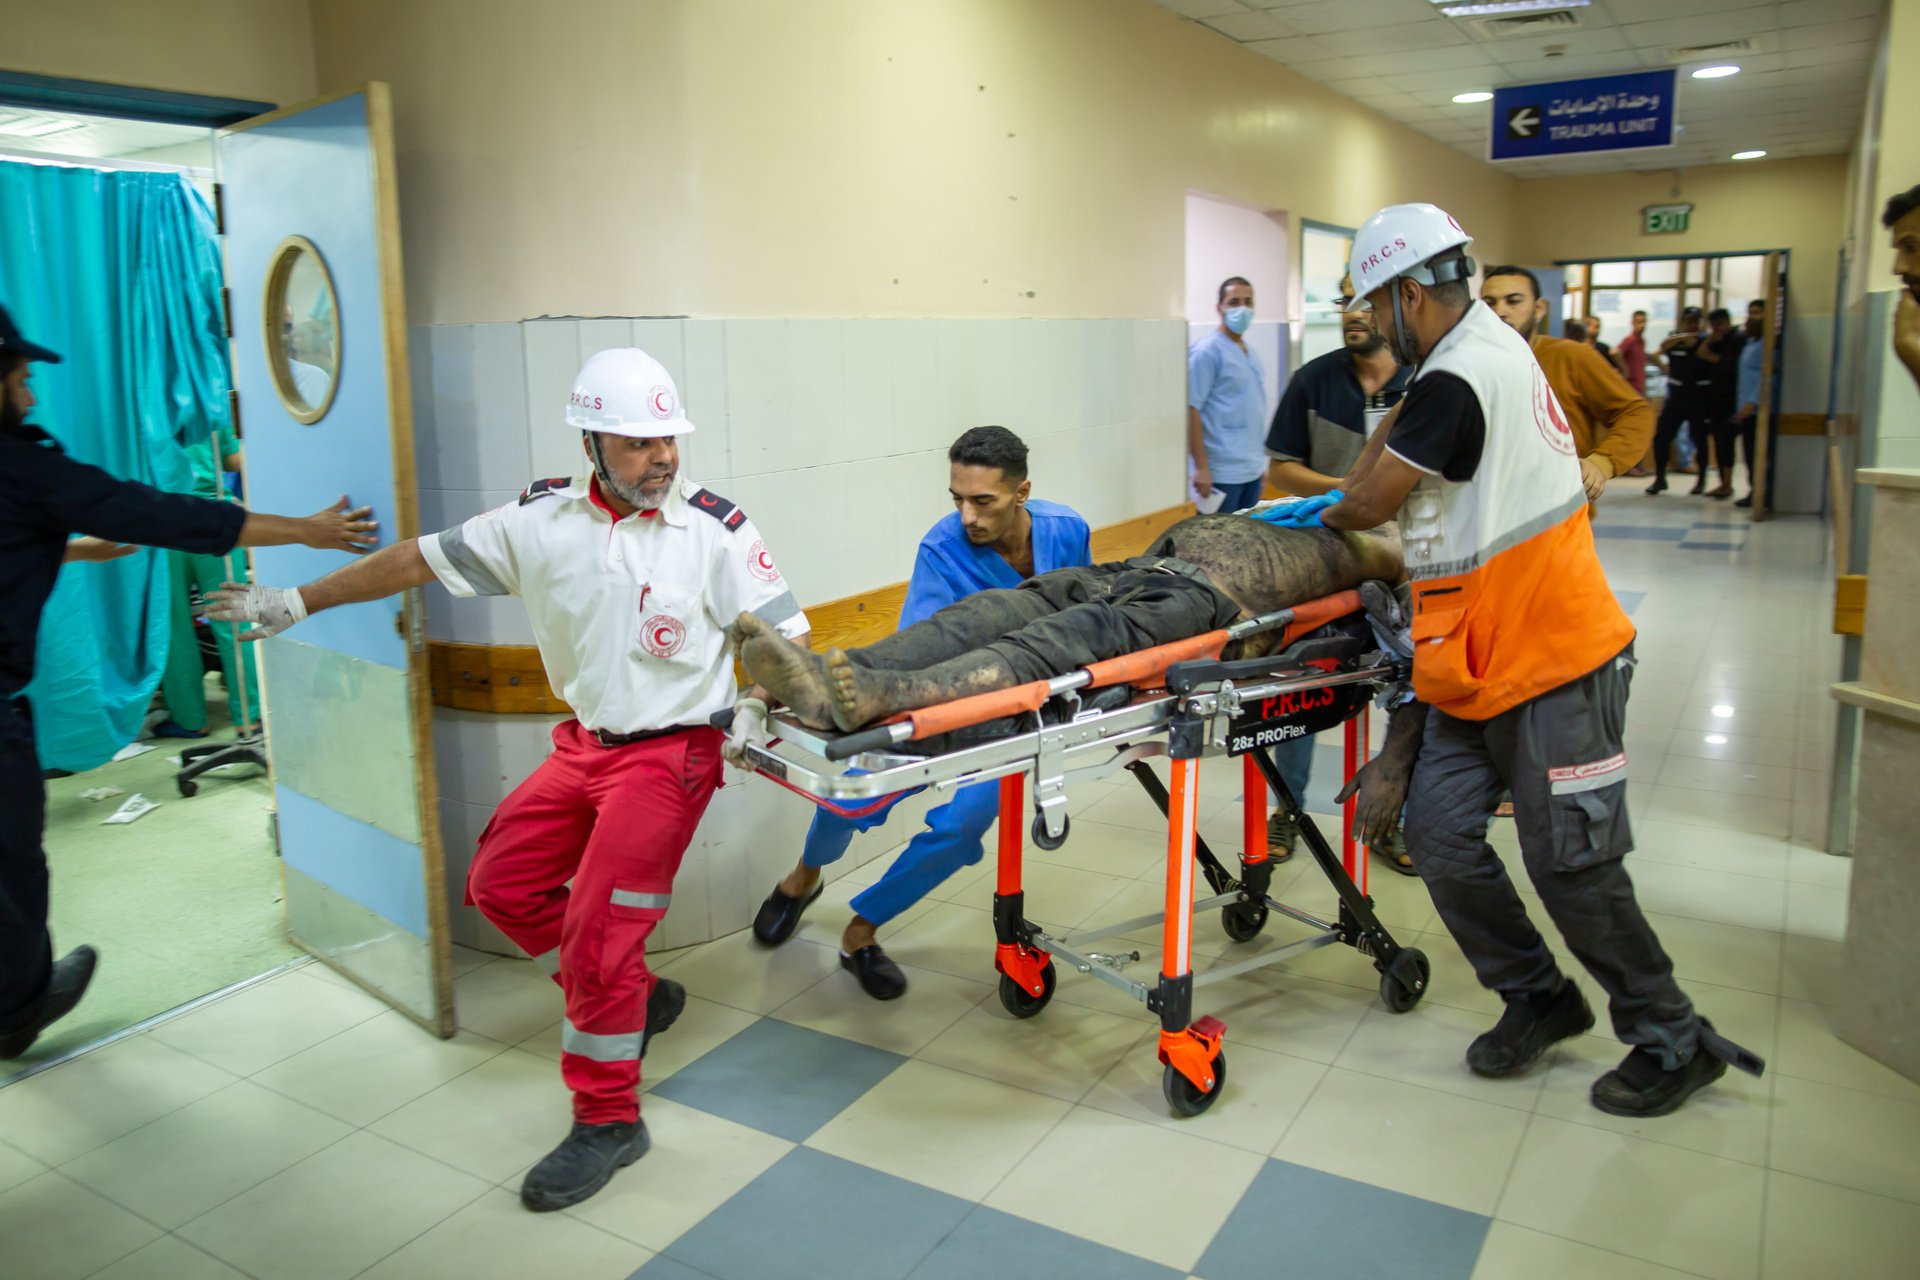 Injured man lying on a stretcher being rushed into a hospital room